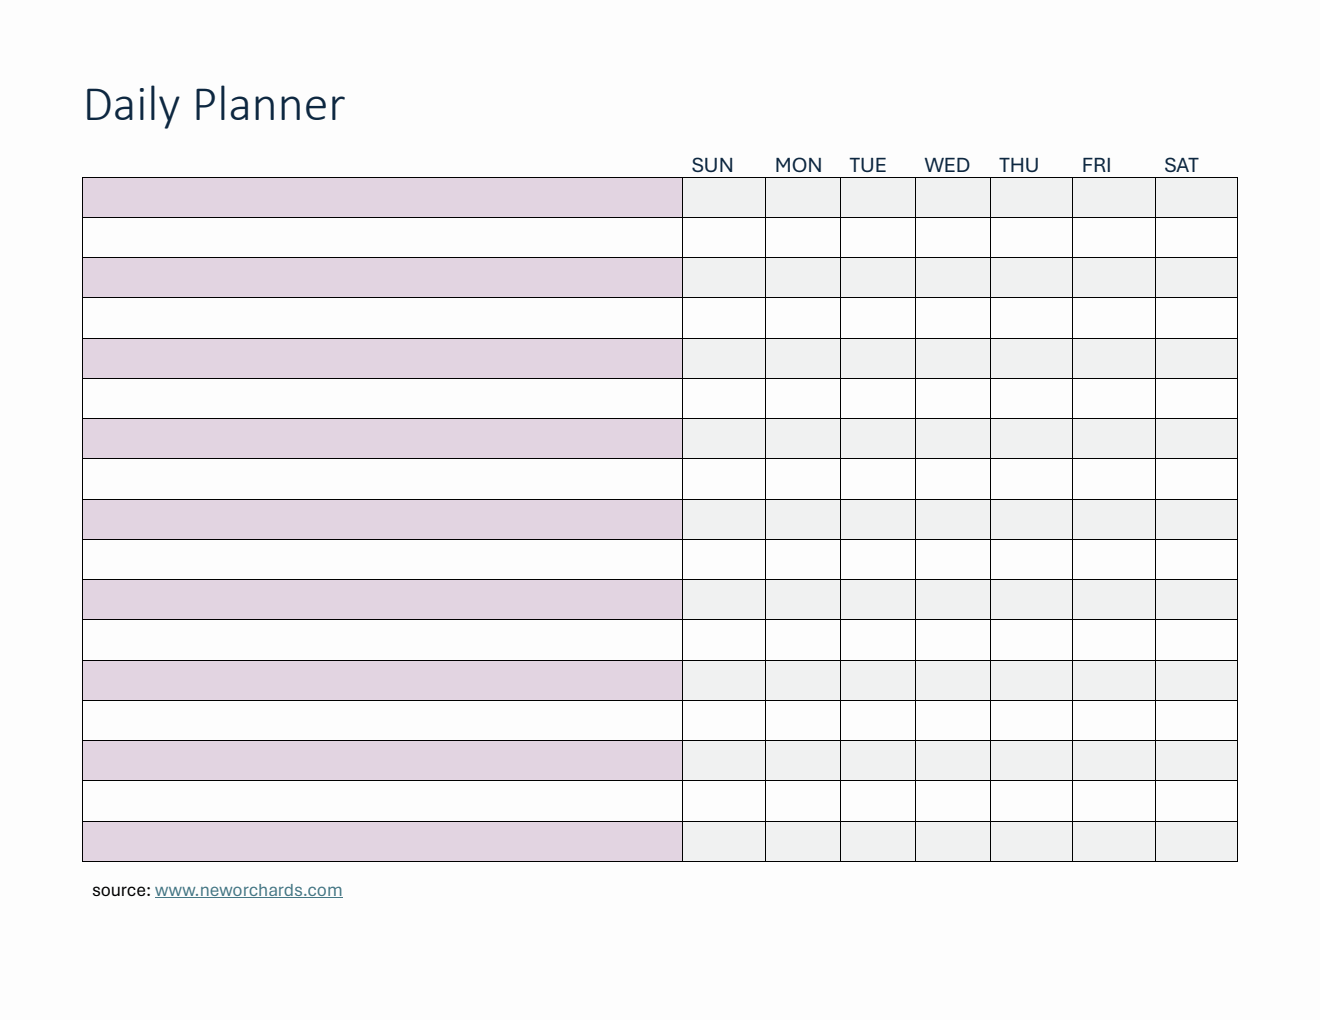 Daily Planner and Checklist Template in Word (Basic)